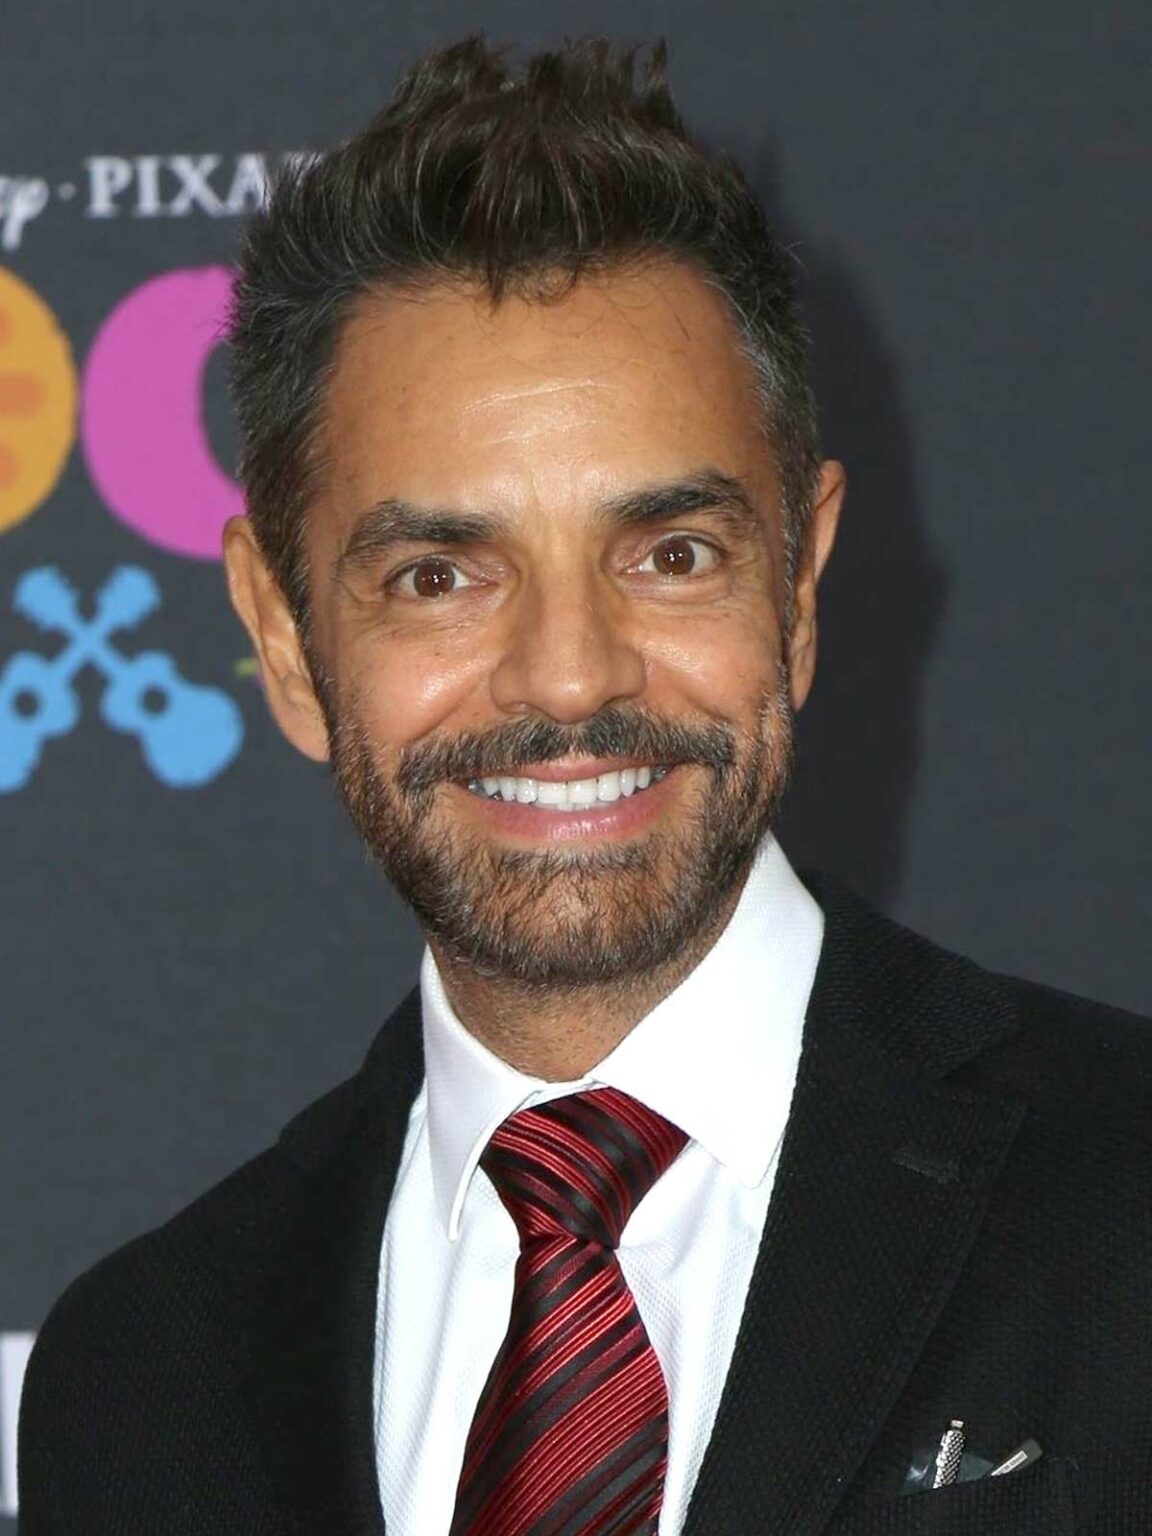 The strange reason why Eugenio Derbez was involved in the death of Paco ...